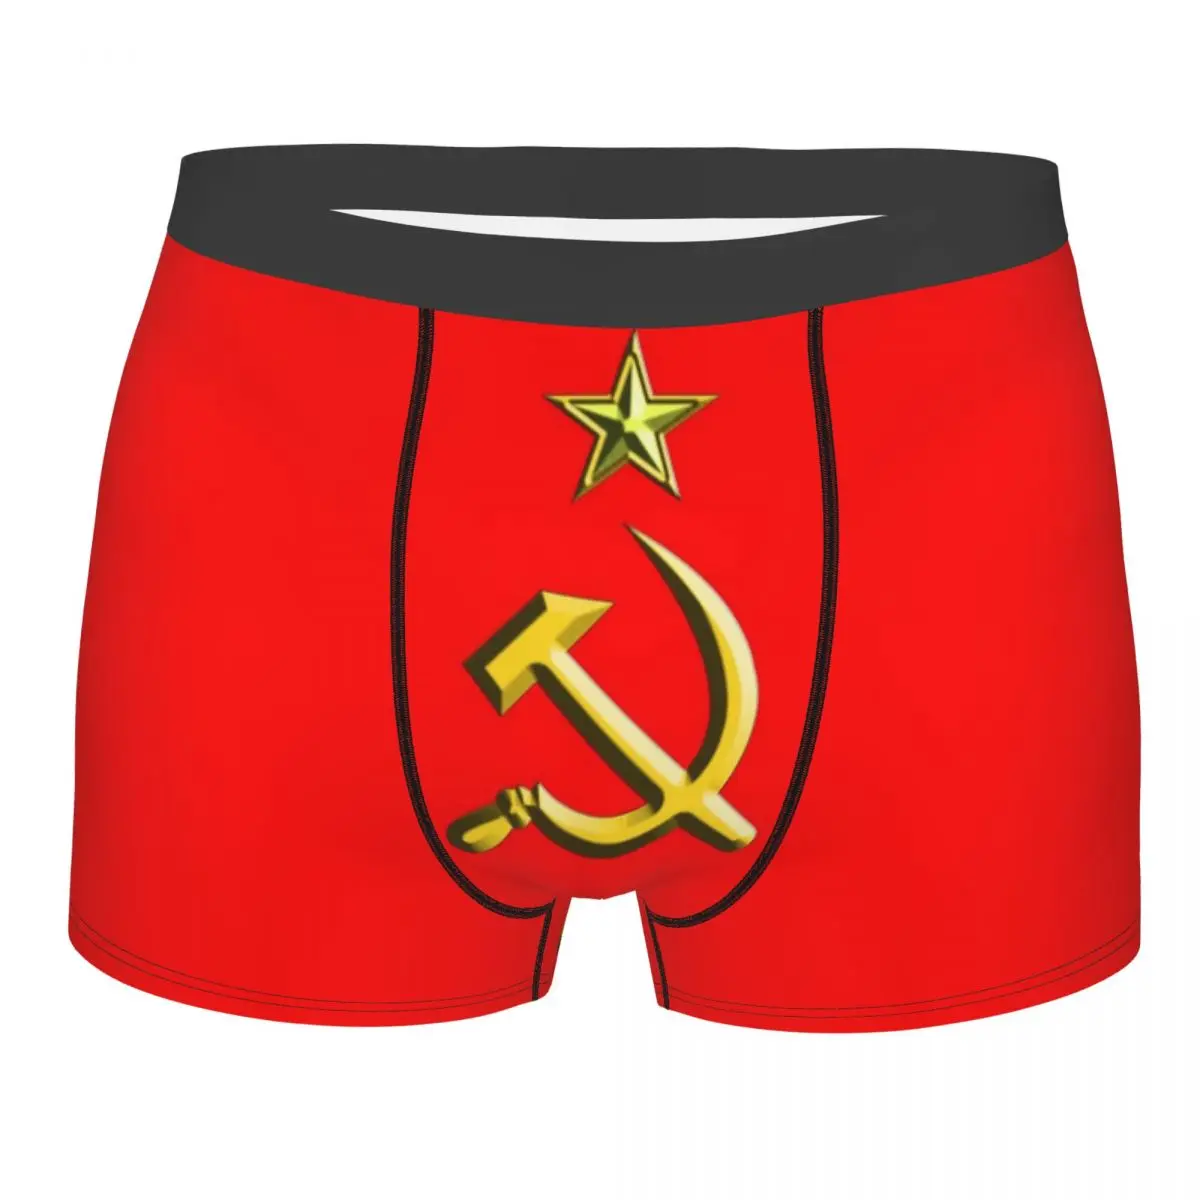 

Russia USSR Communist Soviet Union Hammer Sickle Man Underwear CCCP Boxer Shorts Panties Sexy Soft Underpants for Male S-XXL